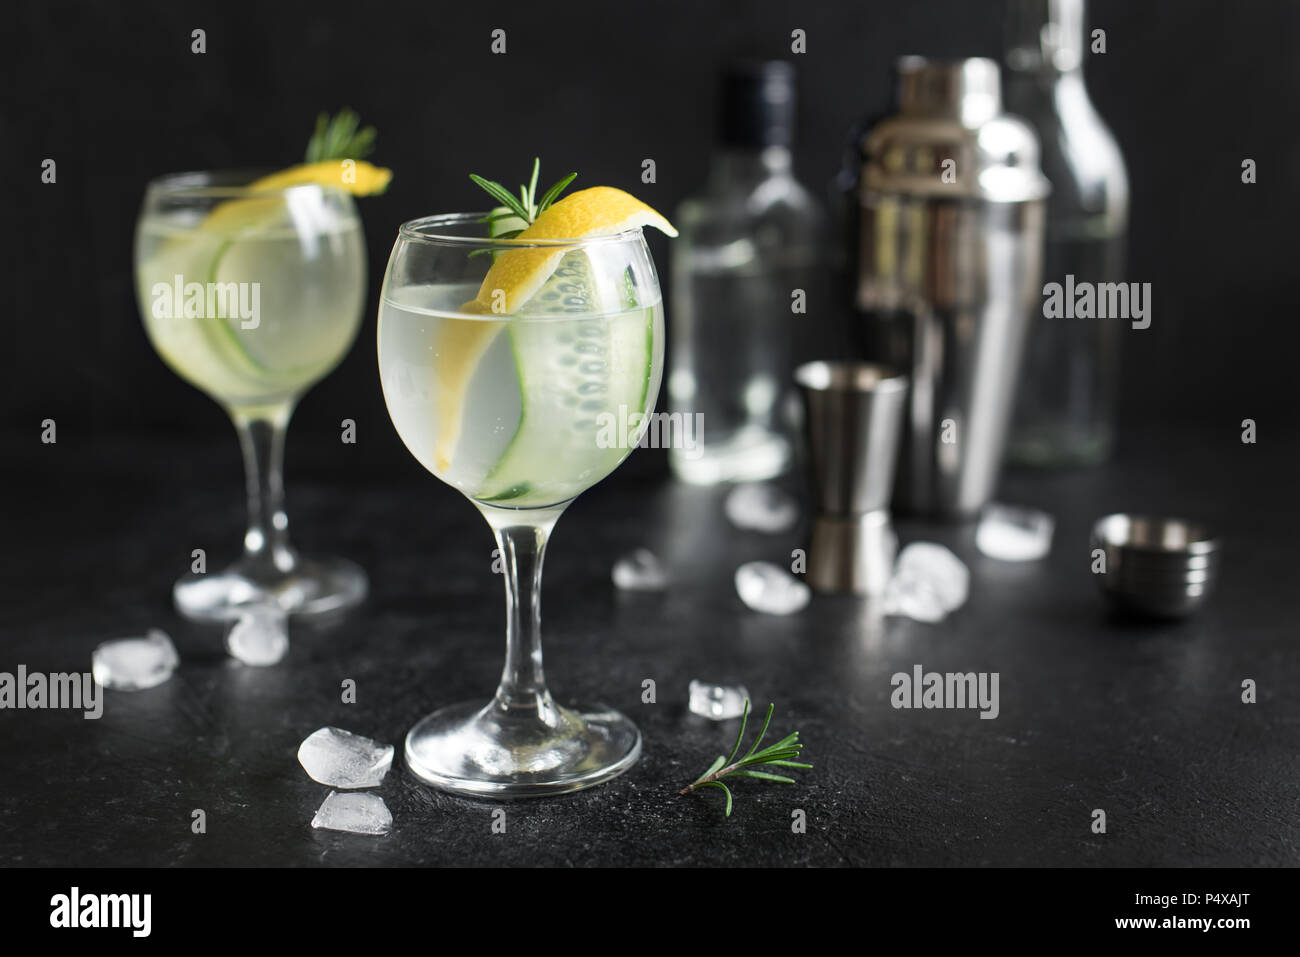 Gin fizz cocktail with lemon, cucumber, rosemary and ice. Gin tonic or gimlet on black background, copy space. Stock Photo